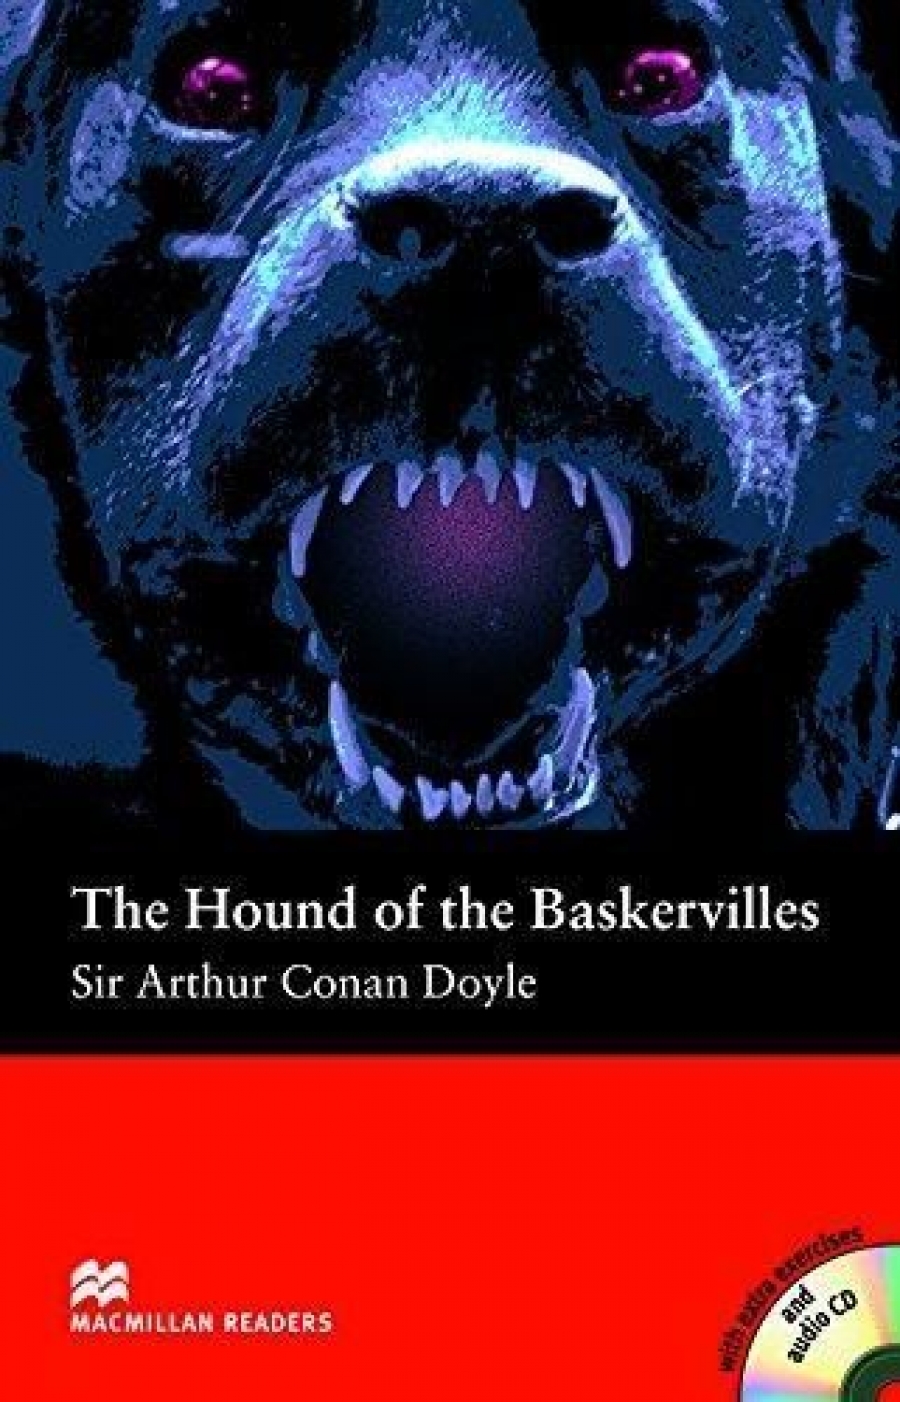 Sir Arthur Conan Doyle, retold by Stephen Colbourn The Hound of the Baskervilles (with Audio CD) 